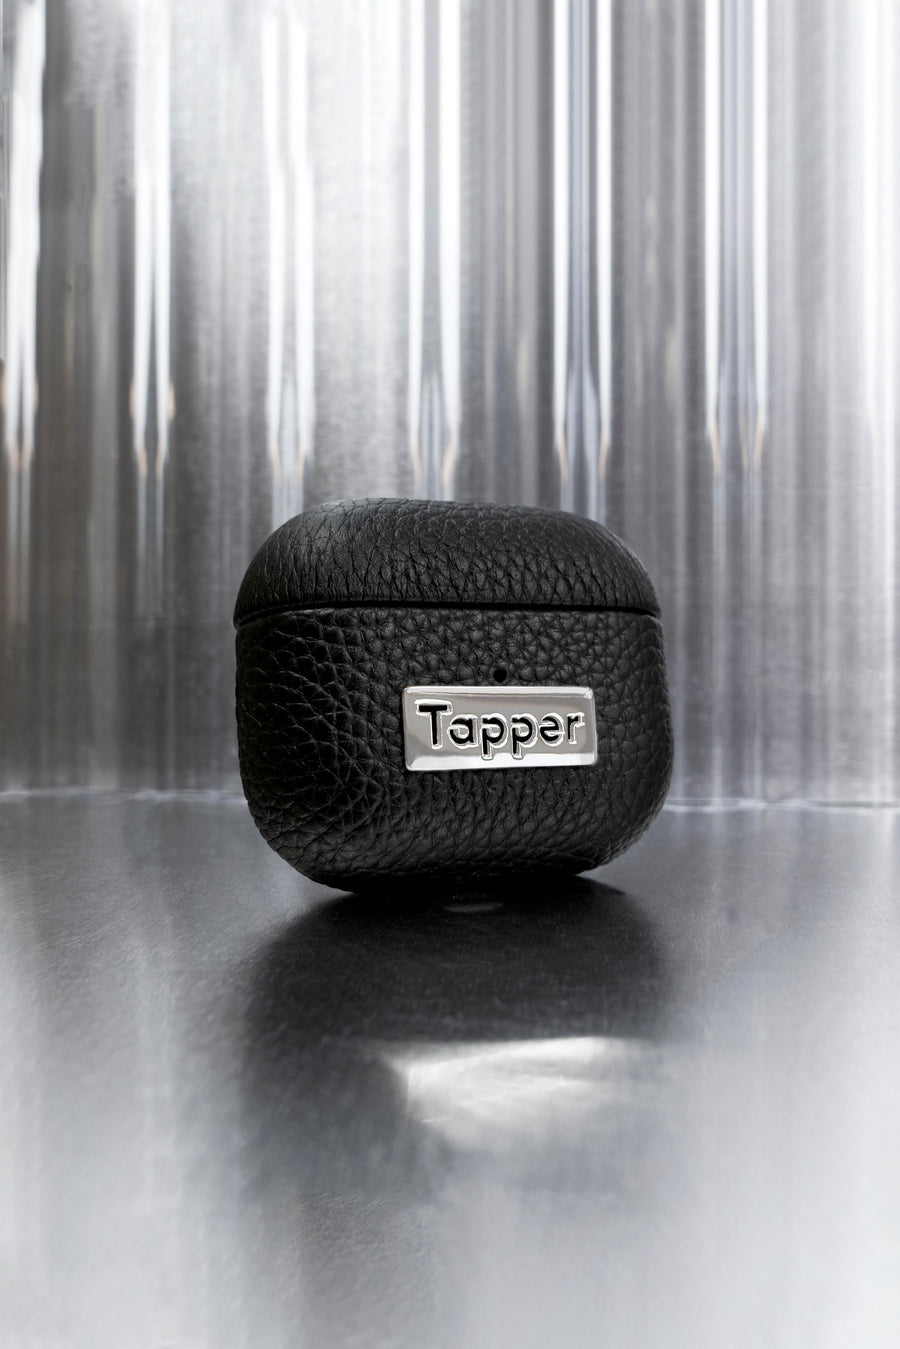 Tapper's luxurious black genuine cow leather AirPods case protects and elevates the look of your AirPods. The luxurious, protective case for AirPods with a metal logo plate colored in silver steps up your AirPods game. The next must-have high end protective Apple AirPods accessory in real leather with metal details. Compatible with AirPods (3rd generation). Designed in Sweden by Tapper. Free Express Shipping at gettapper.com